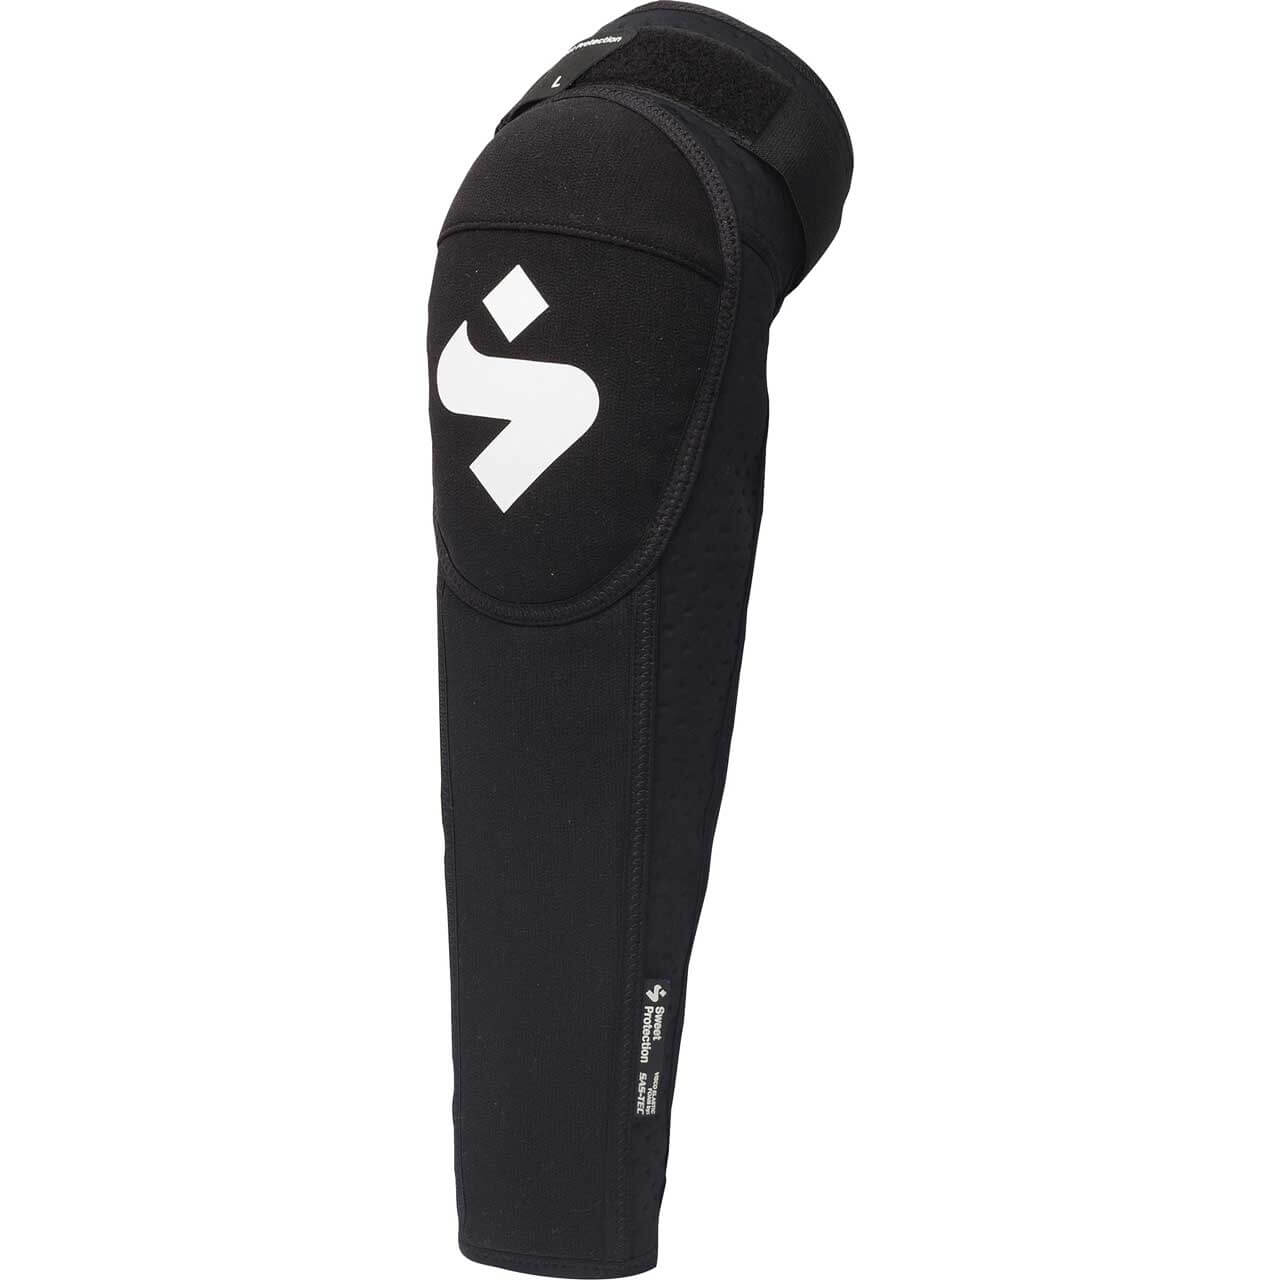 Sweet Protection Knee Shin Pads - Black, M von Sweet Protection}